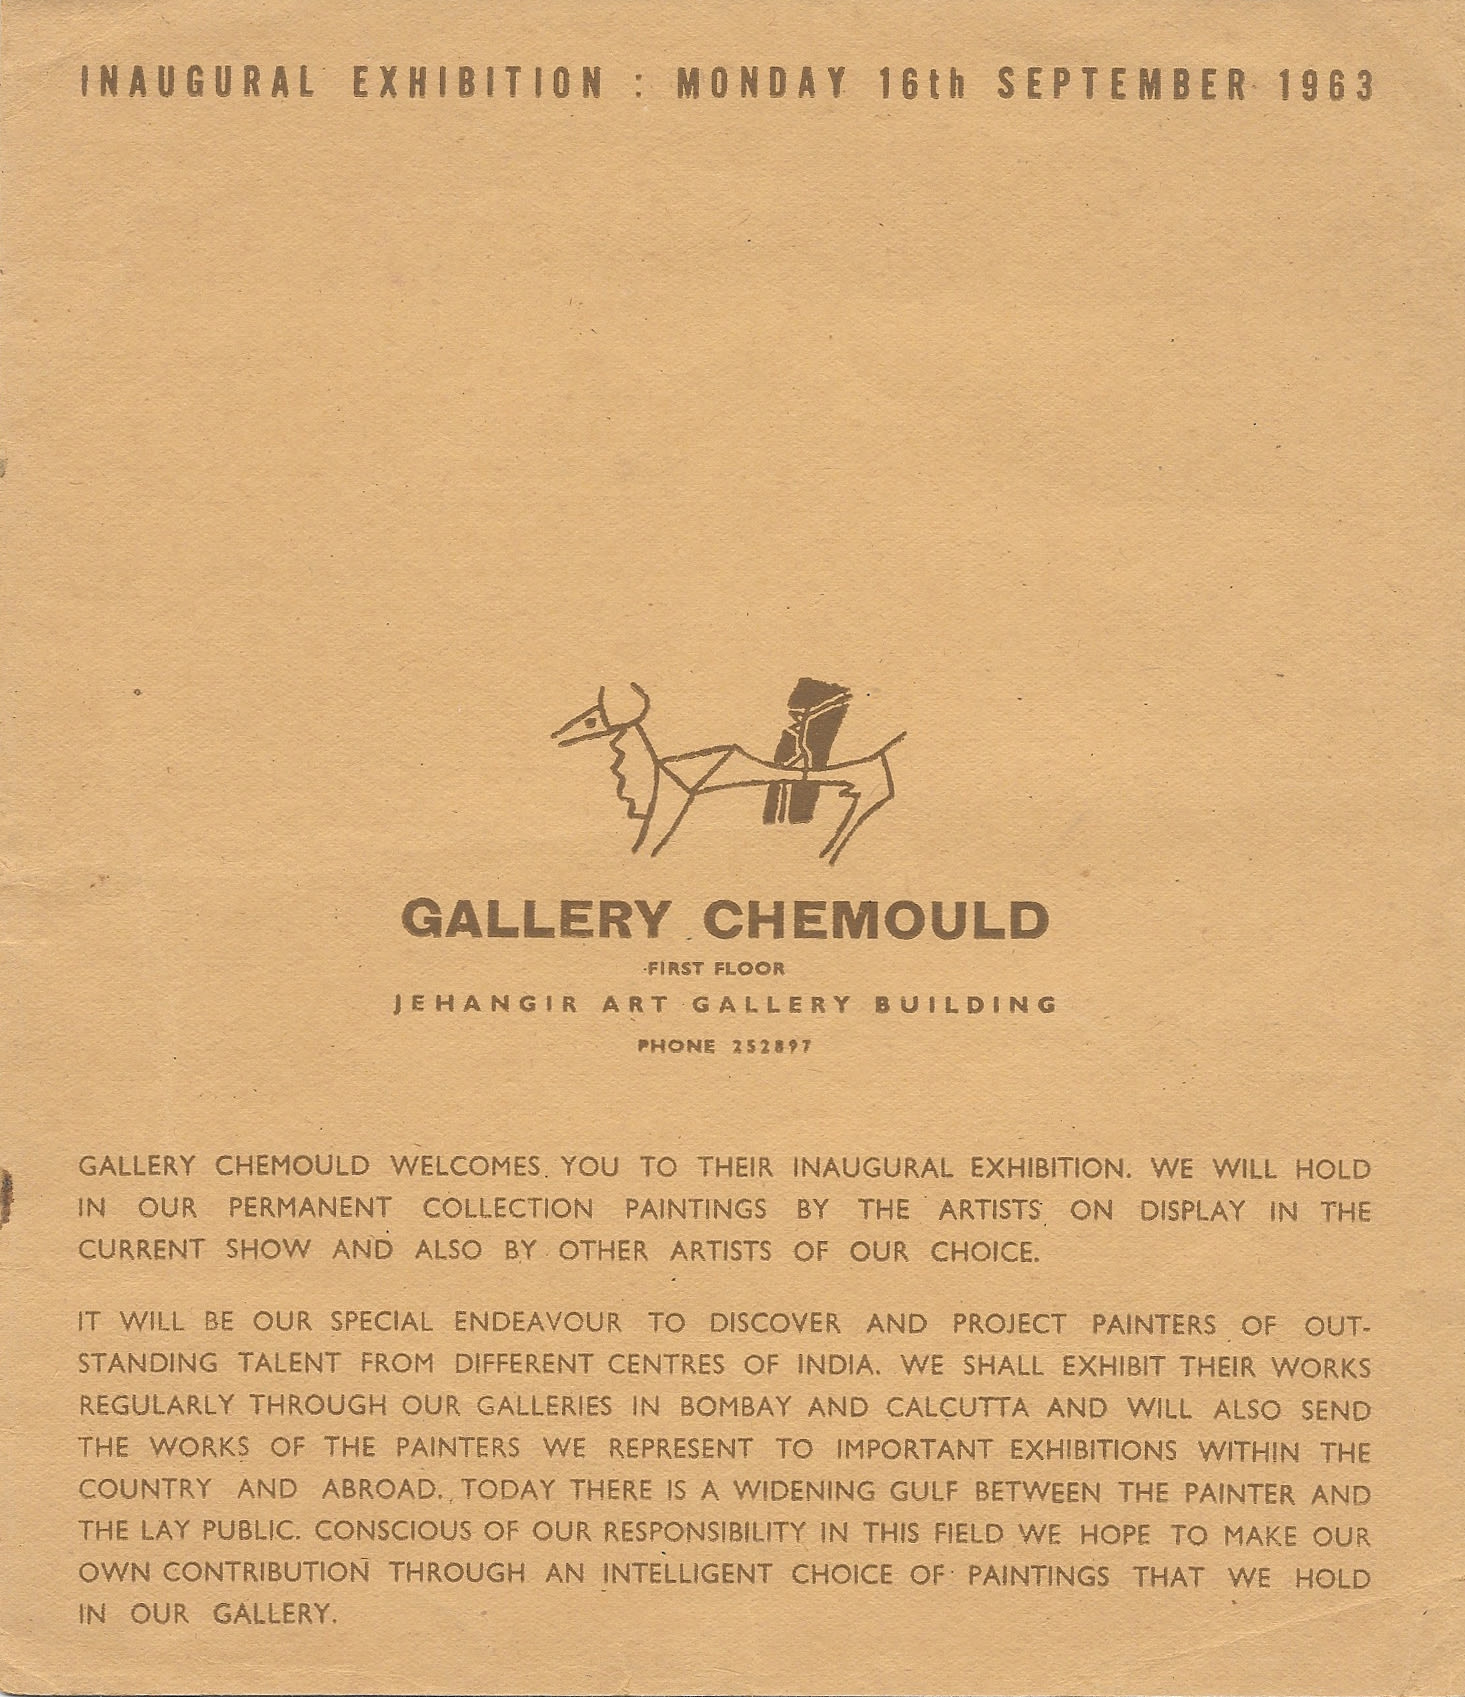 Invitation of Gallery Chemould's inaugural exhibition in September 1963. Courtesy of Chemould Archives, Mumbai, India.